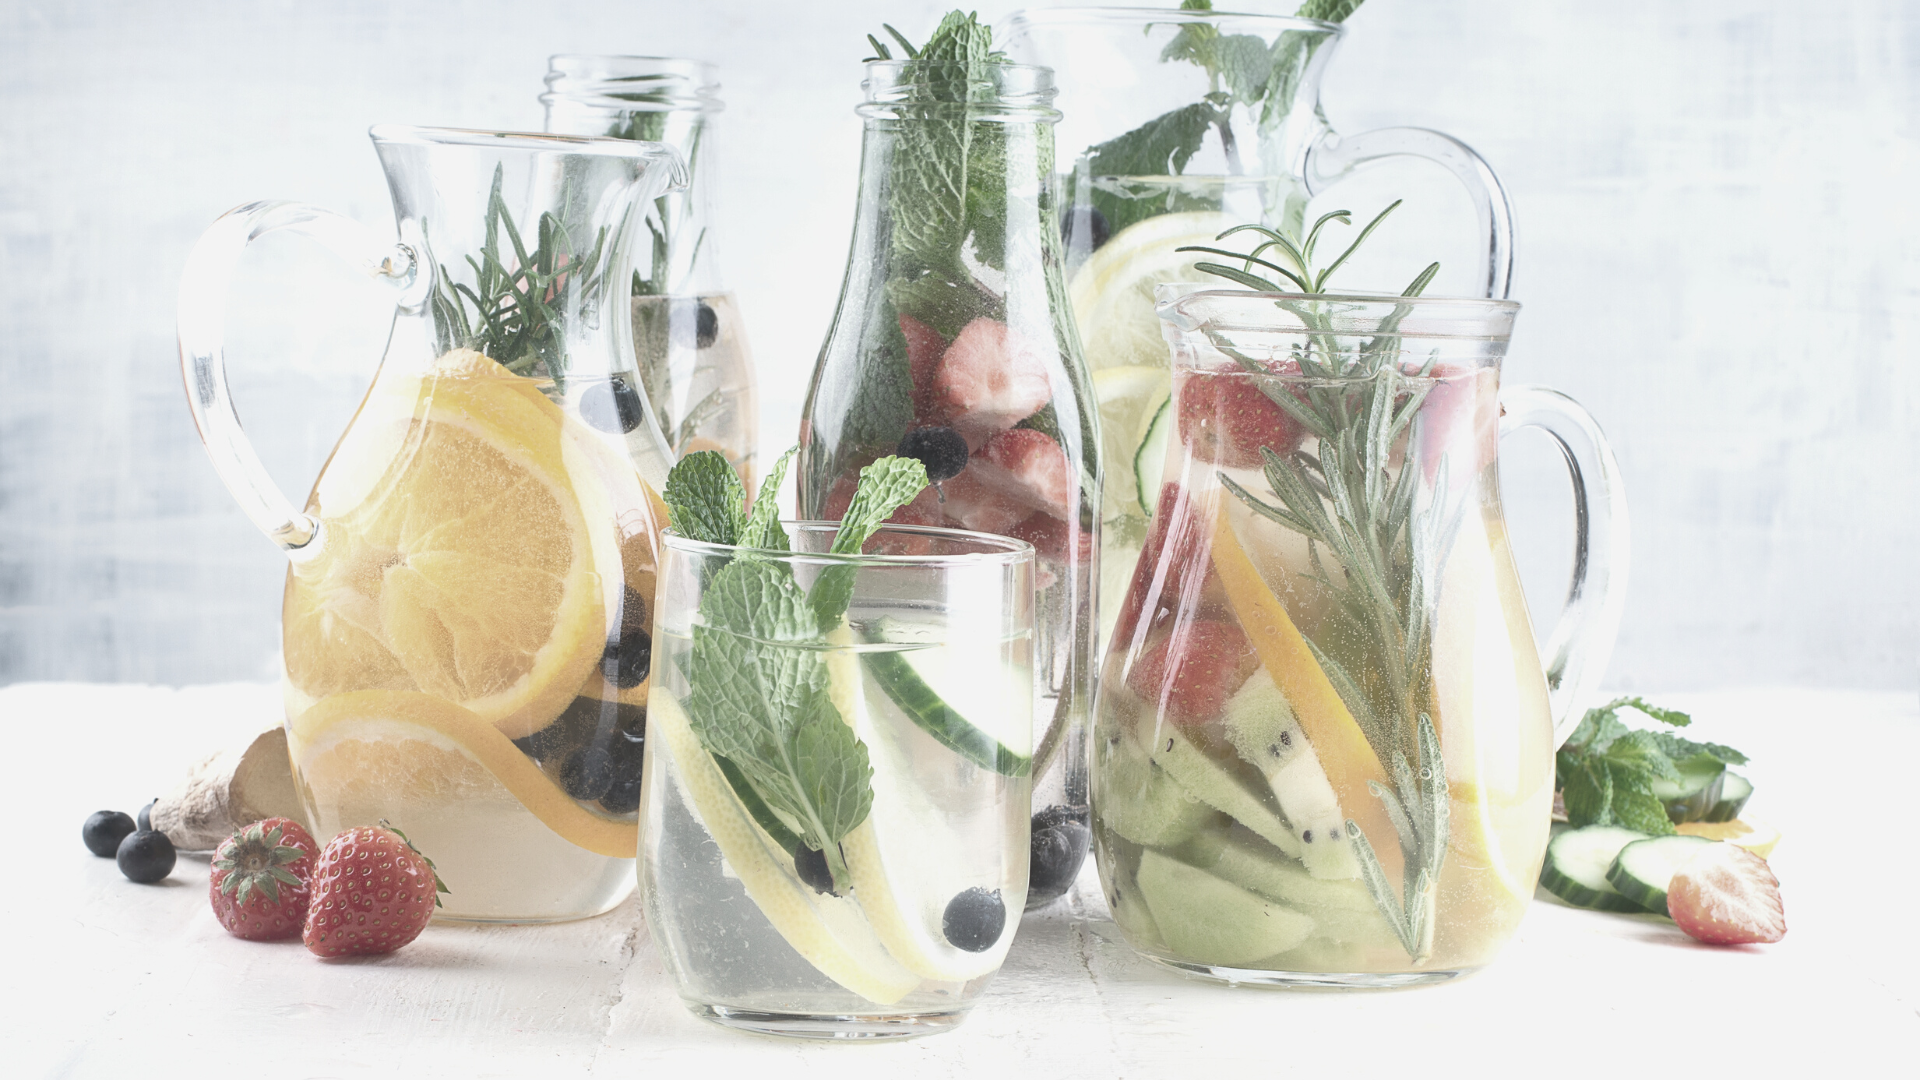 Three Day Detox Plan {a gut reset without feeling miserable}